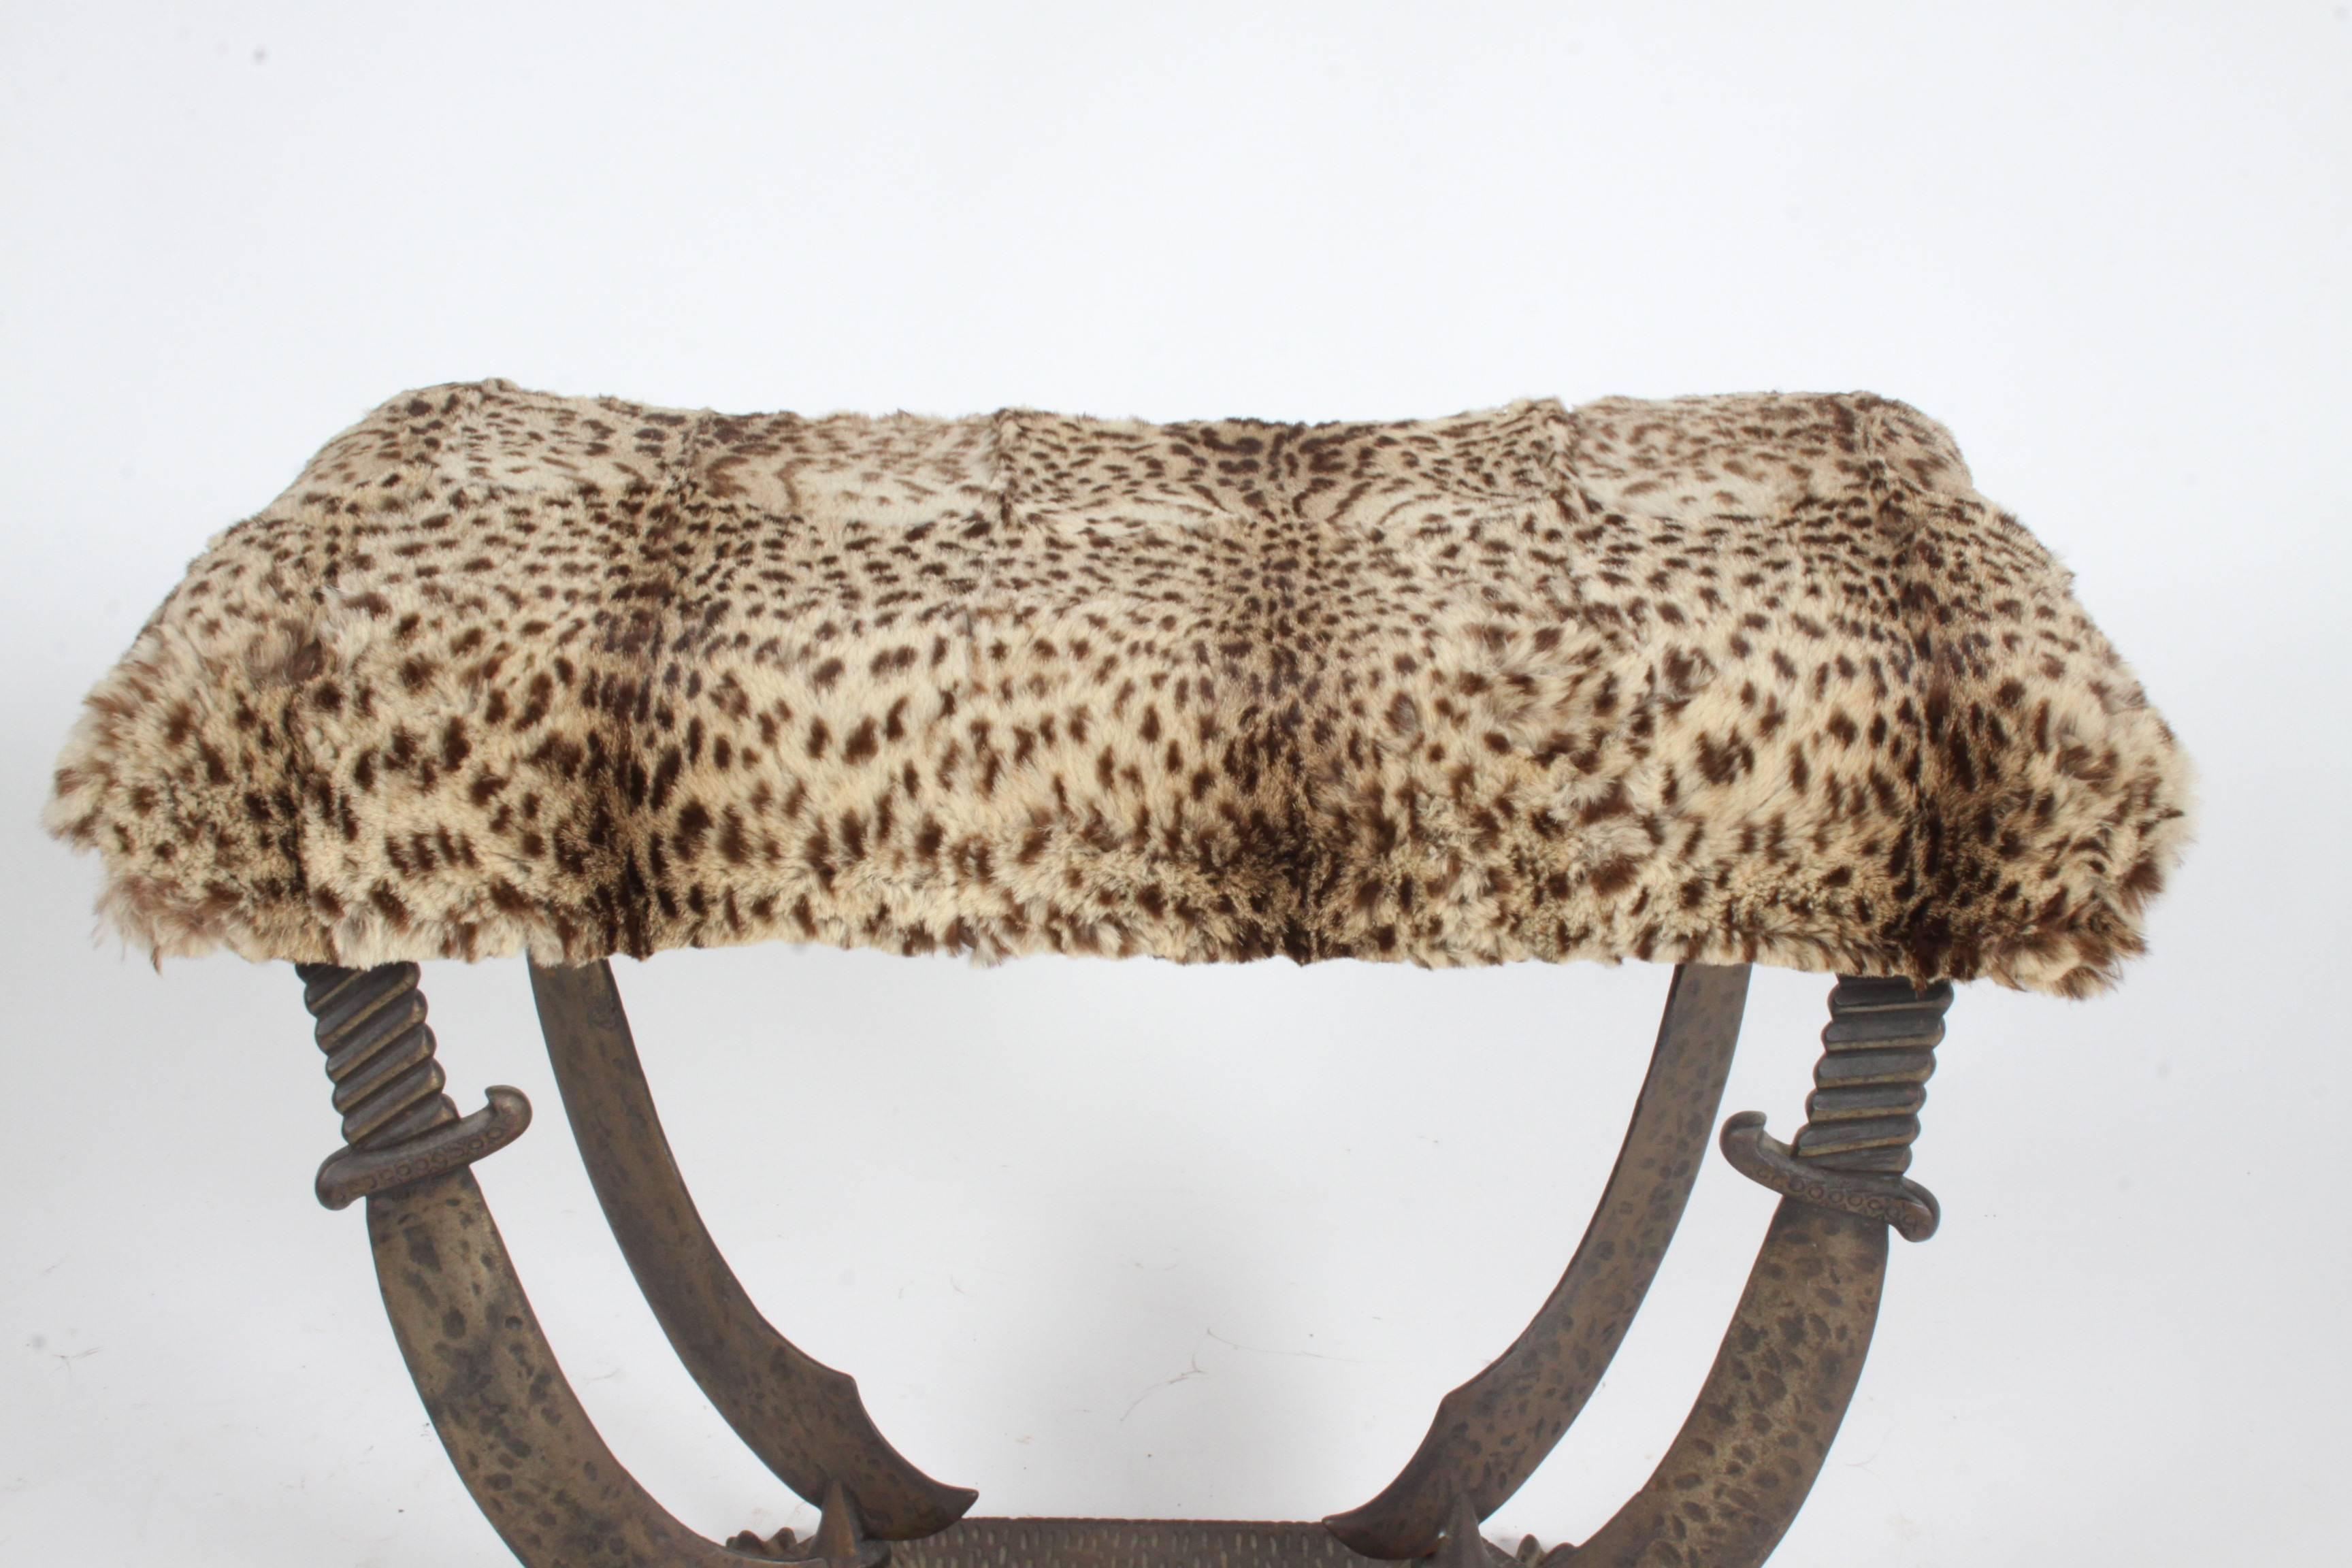 Art Deco Sabre Cast Iron Bench or Stool with Leopard Upholstery by Verona For Sale 2